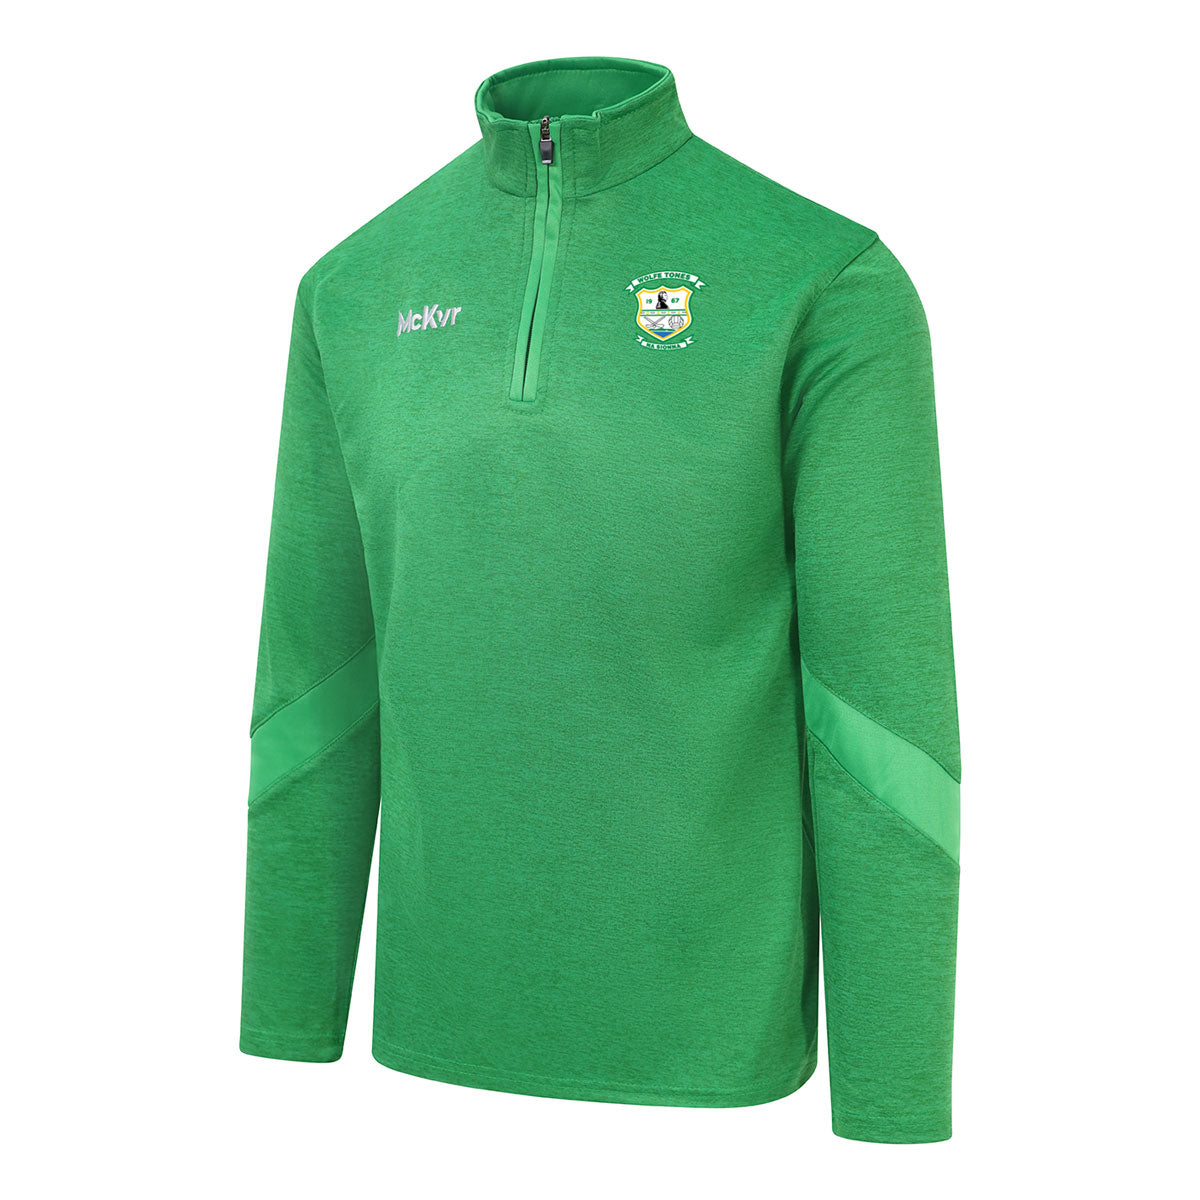 Mc Keever Wolfe Tones Na Sionna, Clare Core 22 1/4 Zip Top - Adult - Green